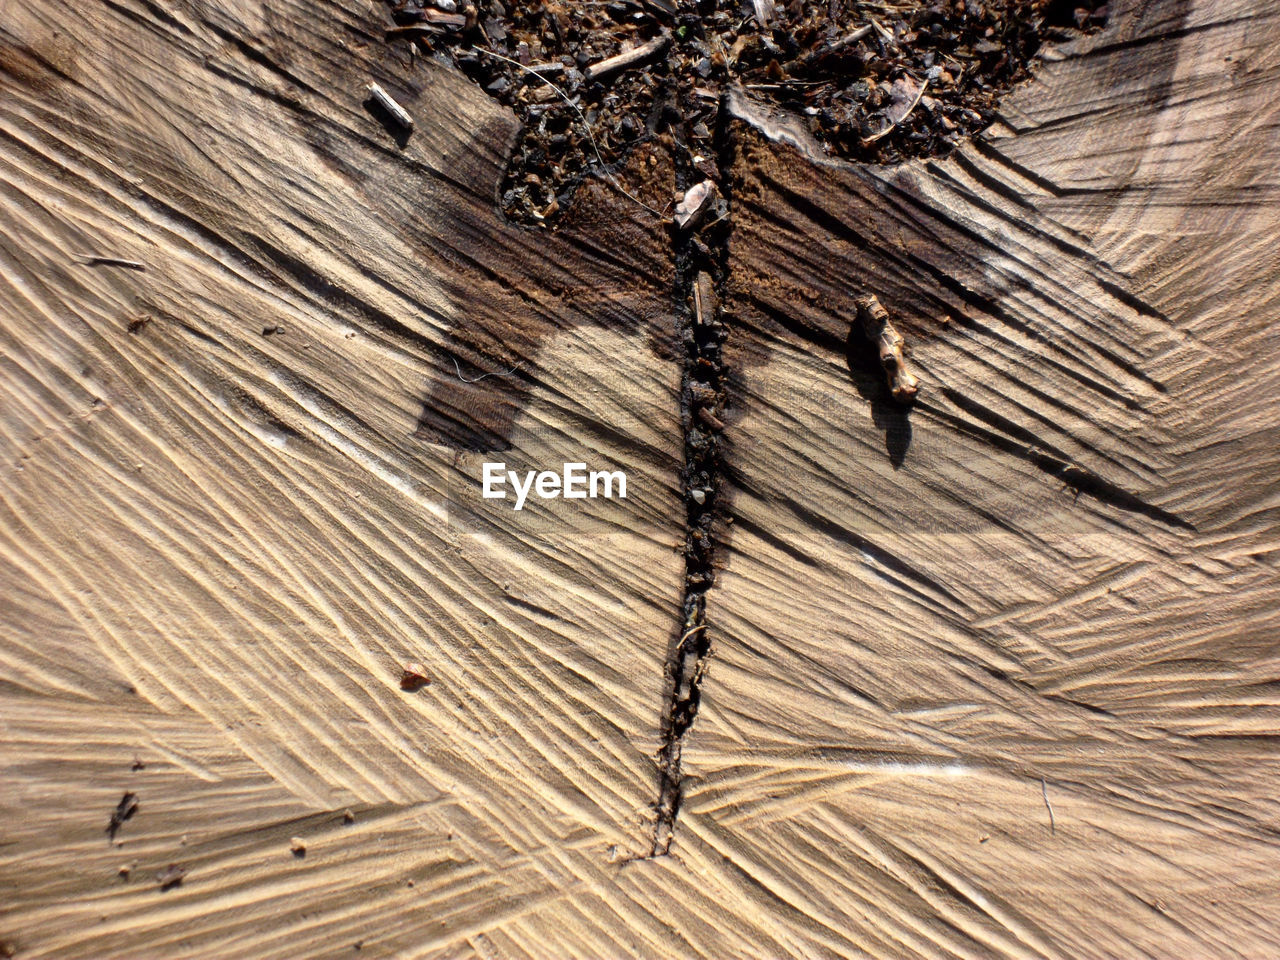 CLOSE-UP OF WOOD ON WOODEN SURFACE